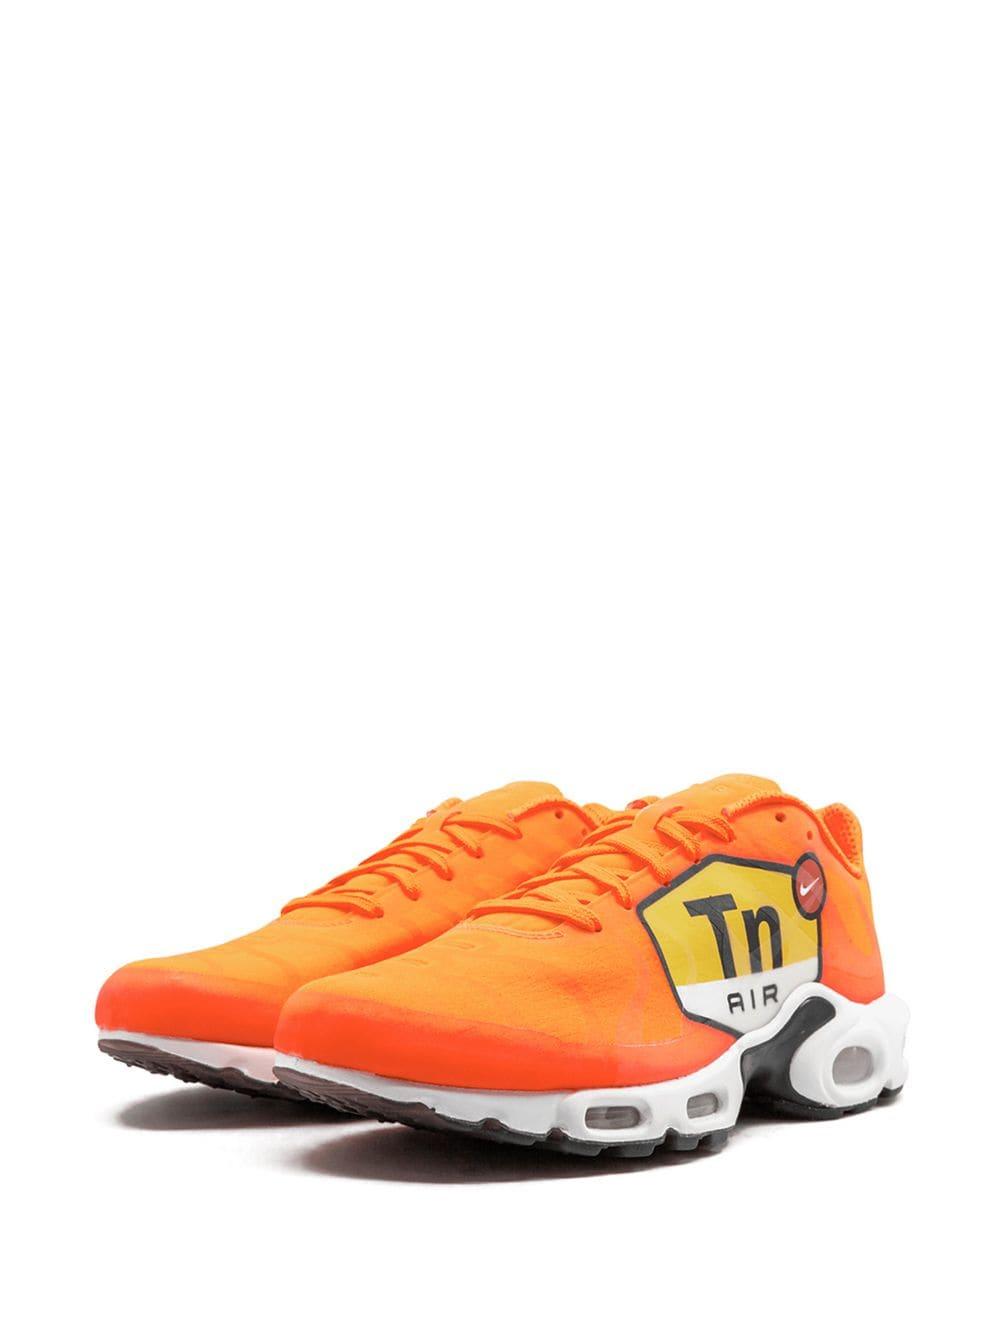 Nike Synthetic Air Max Plus Ns Gpx 